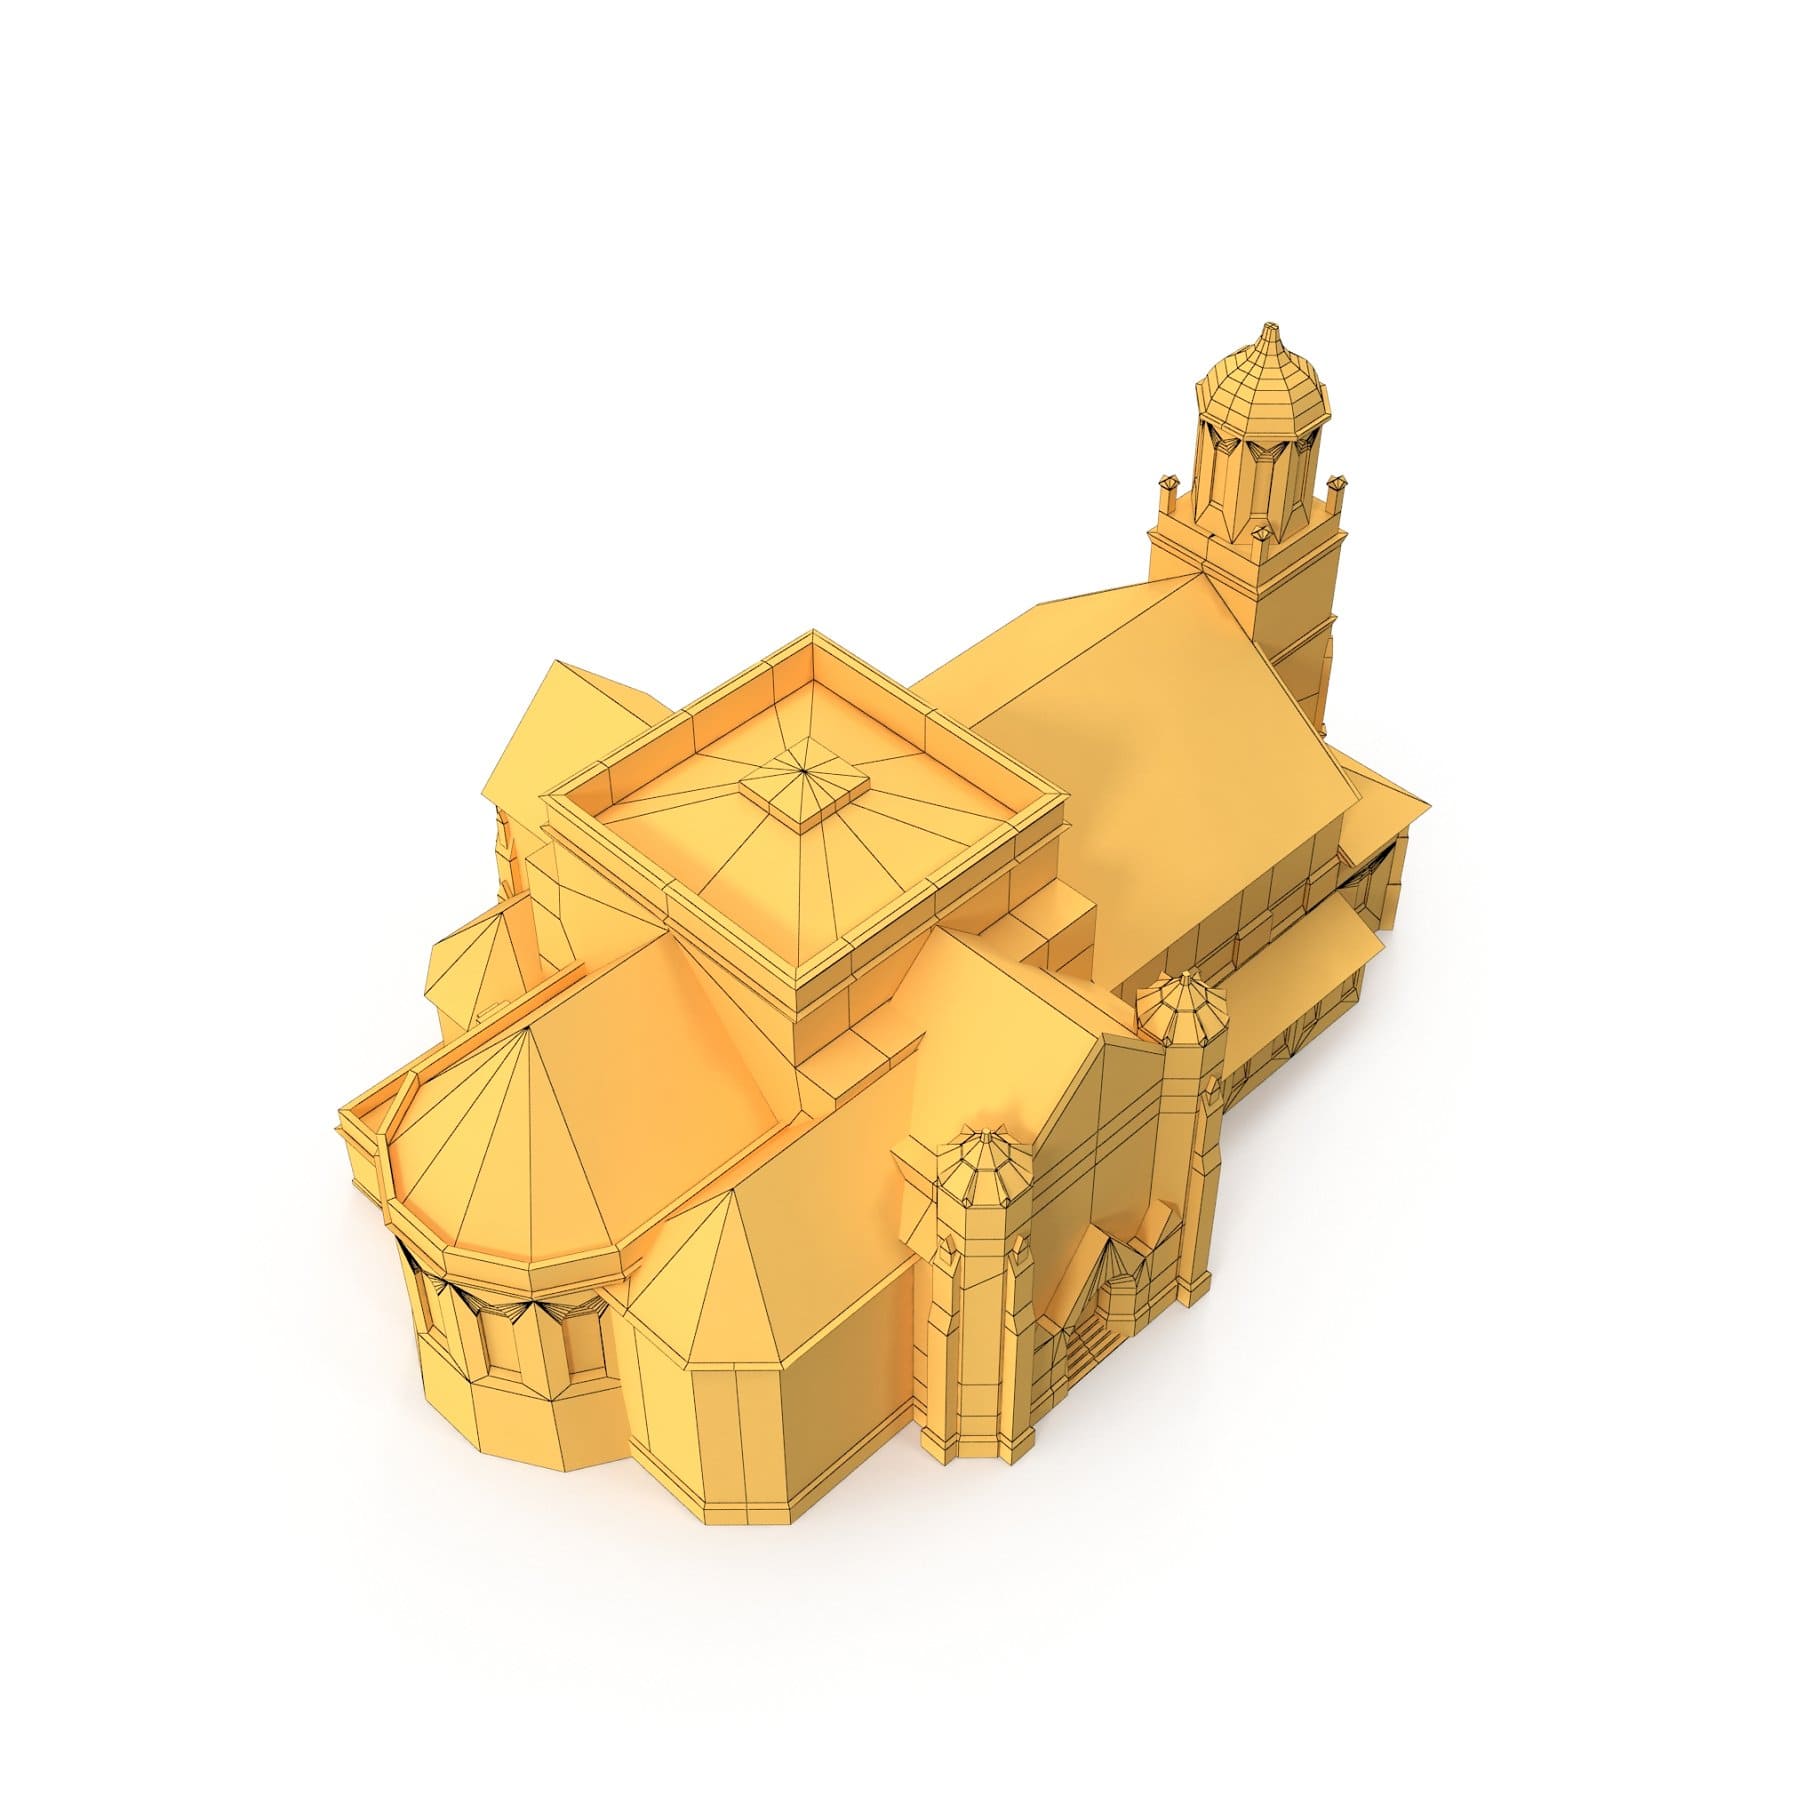 Top view of the 3D model of the church building.